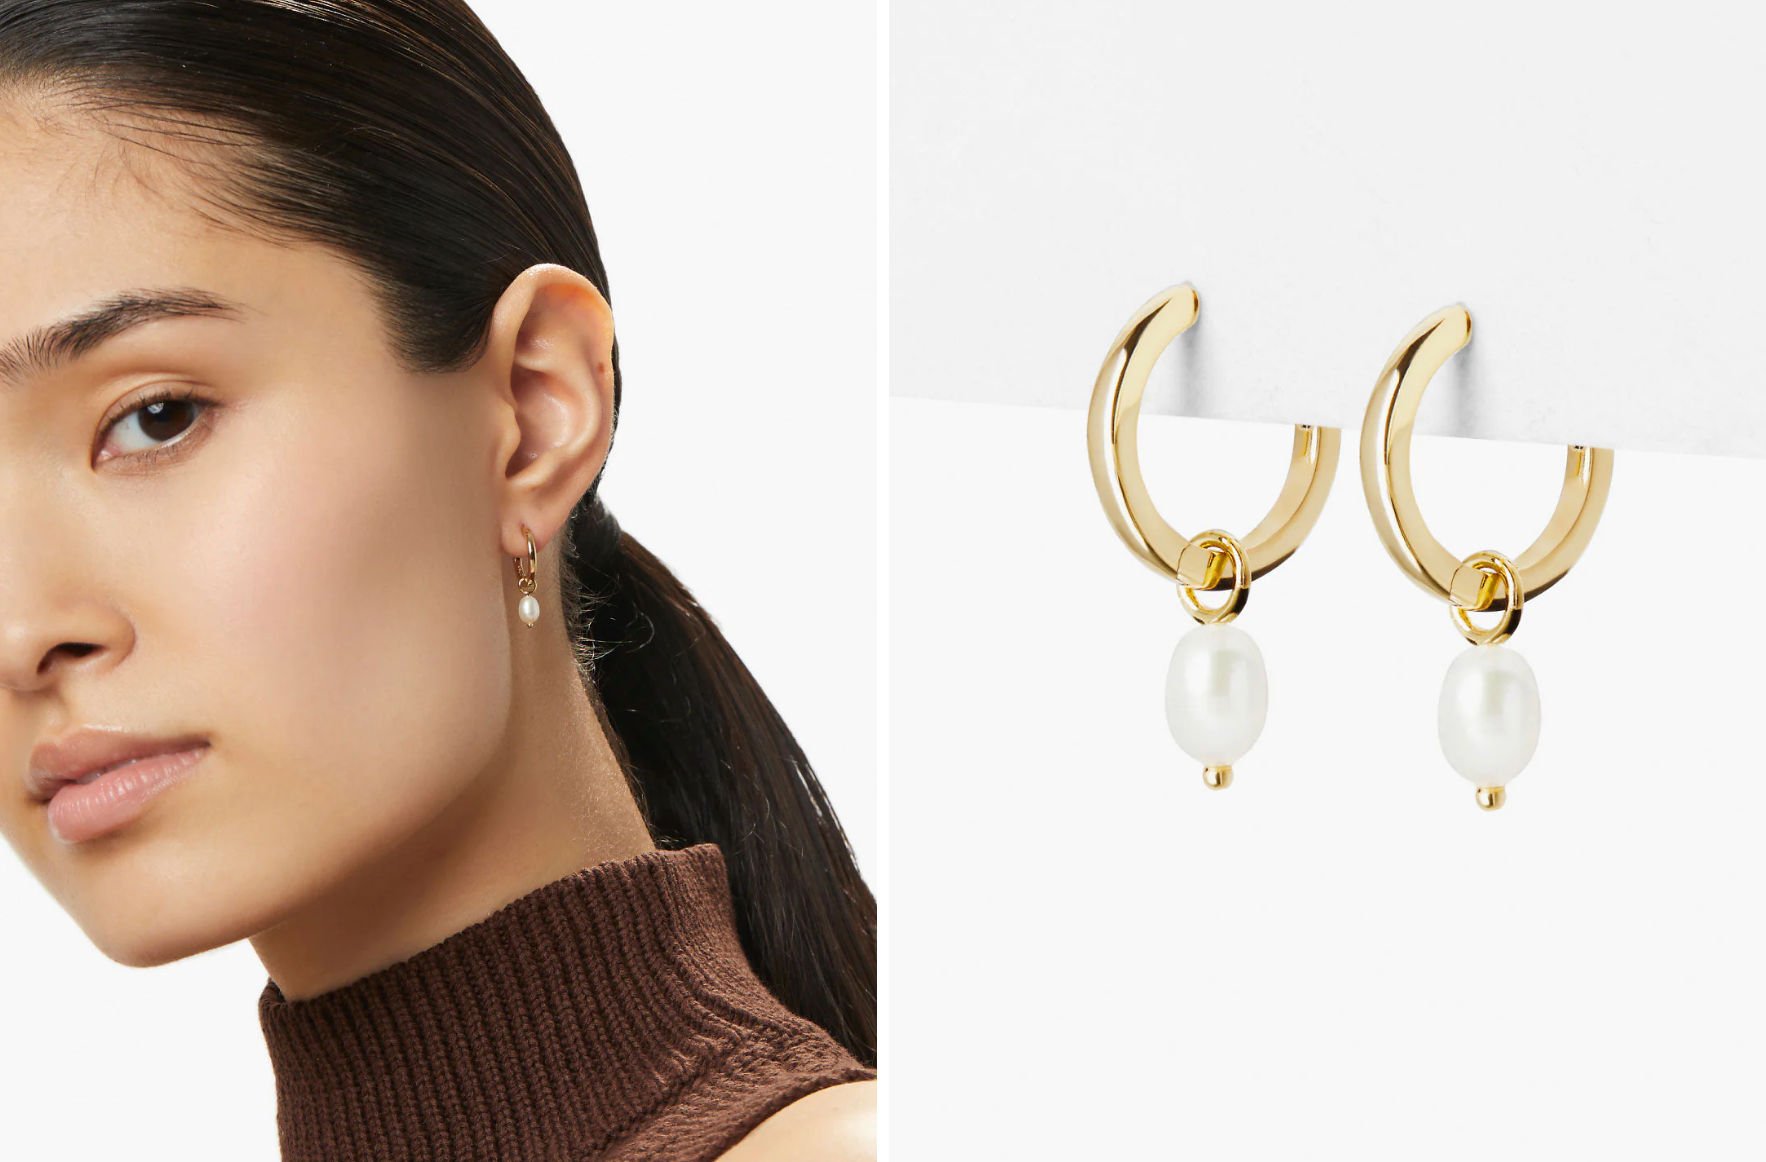 Side by side product images of the same earrings on a model and against a white background